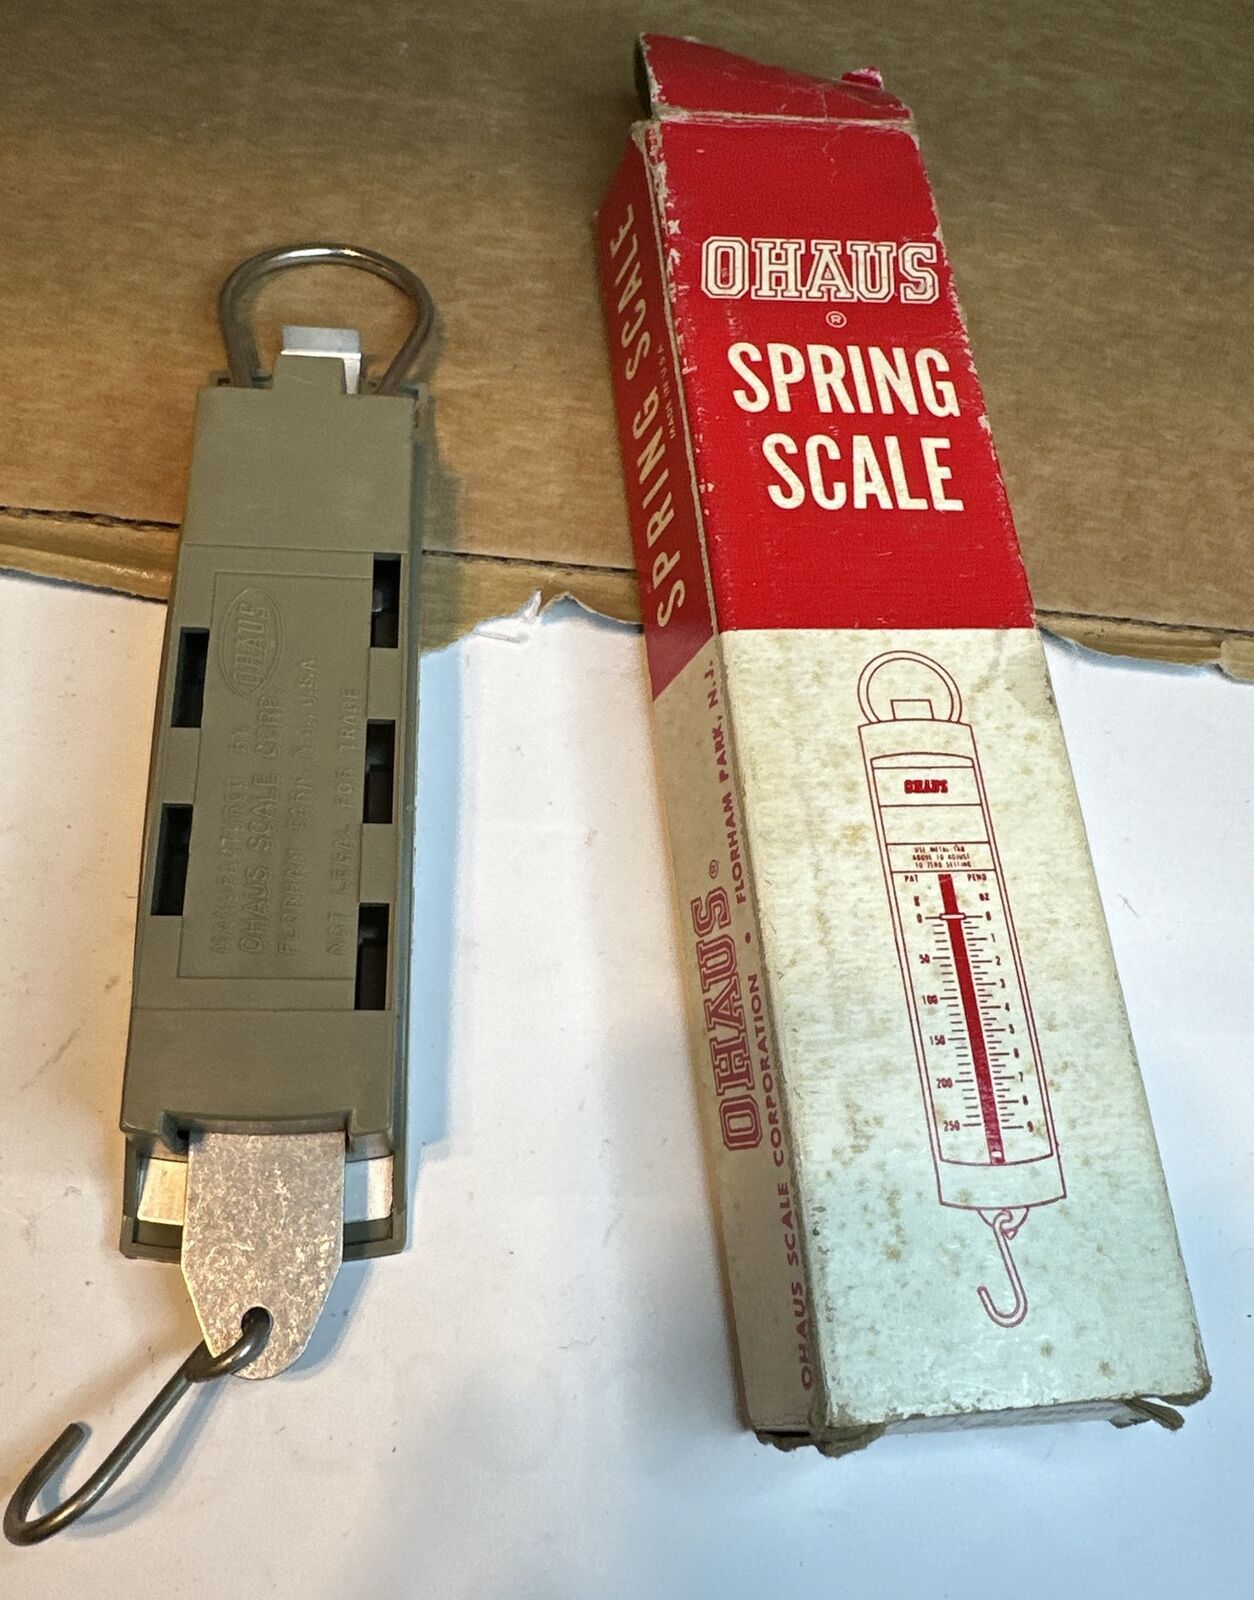 Vintage Ohaus Spring Scale Model 8075-1 Made in NJ USA - Original Box Included